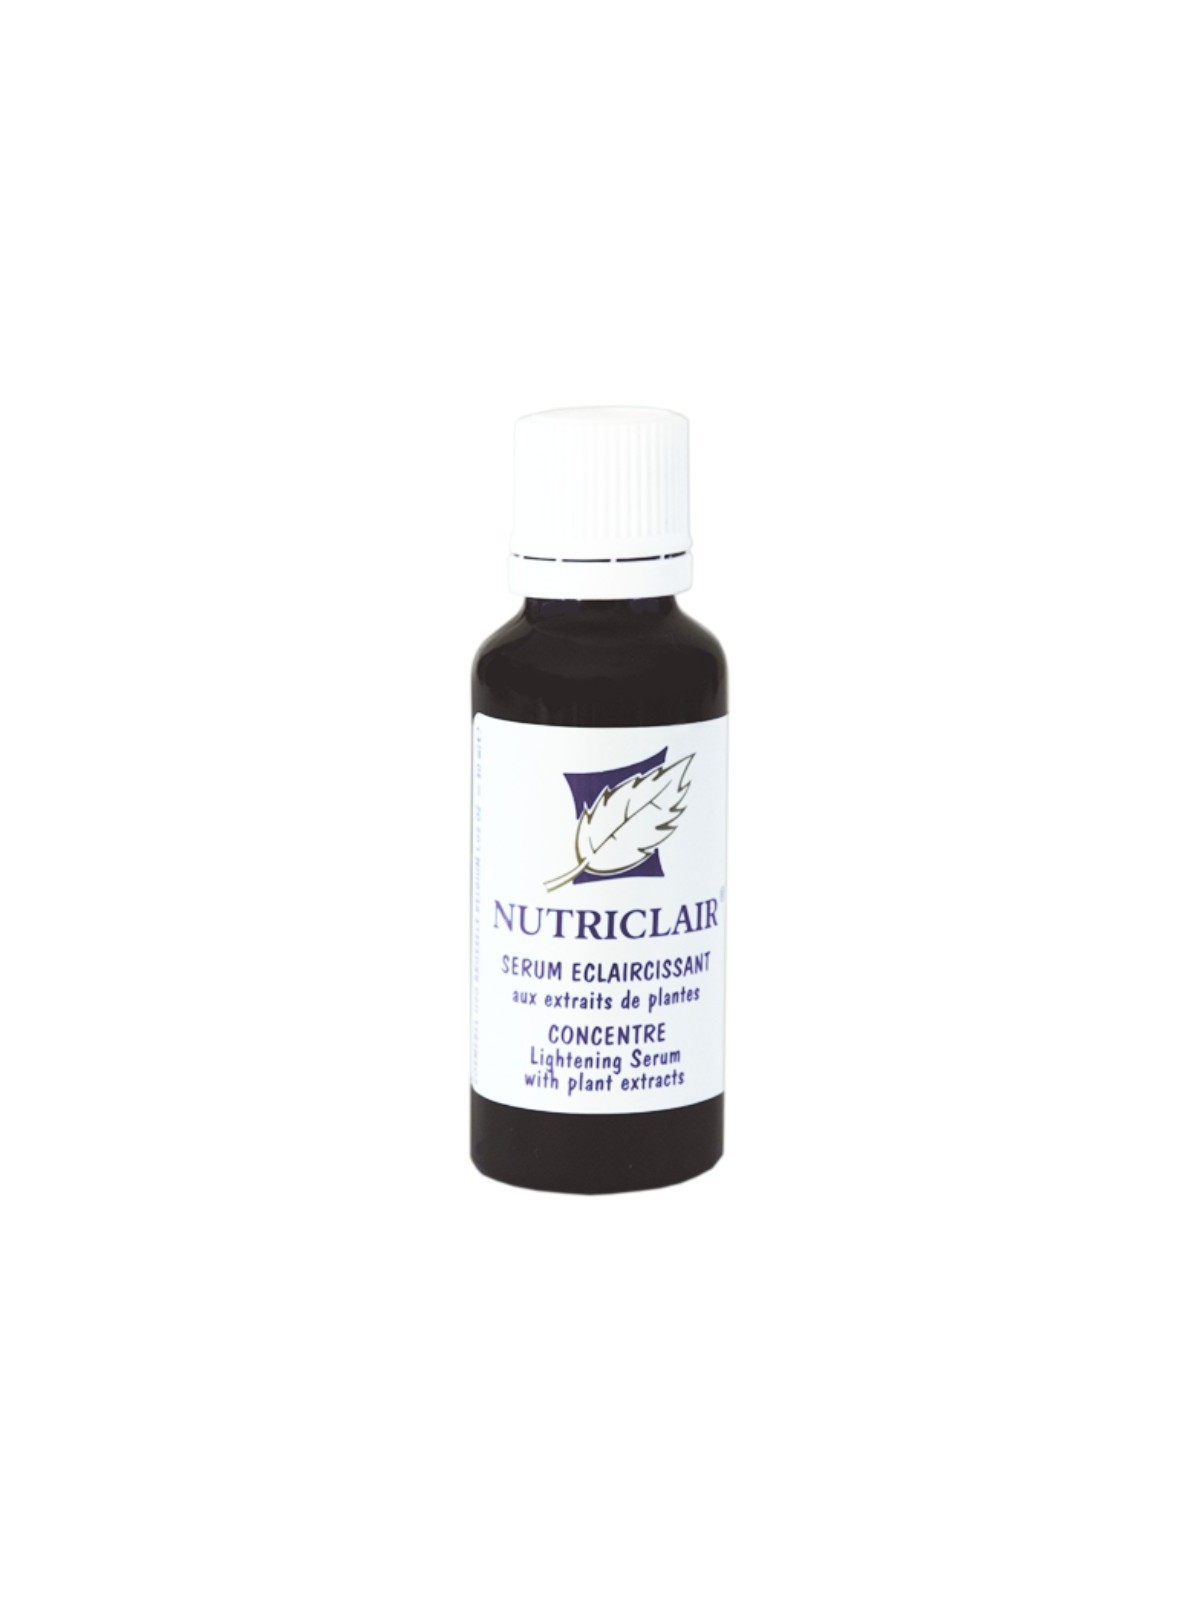 BRIGHTENING SERUM CONCENTRATED 30 ml NUTRICLAIR